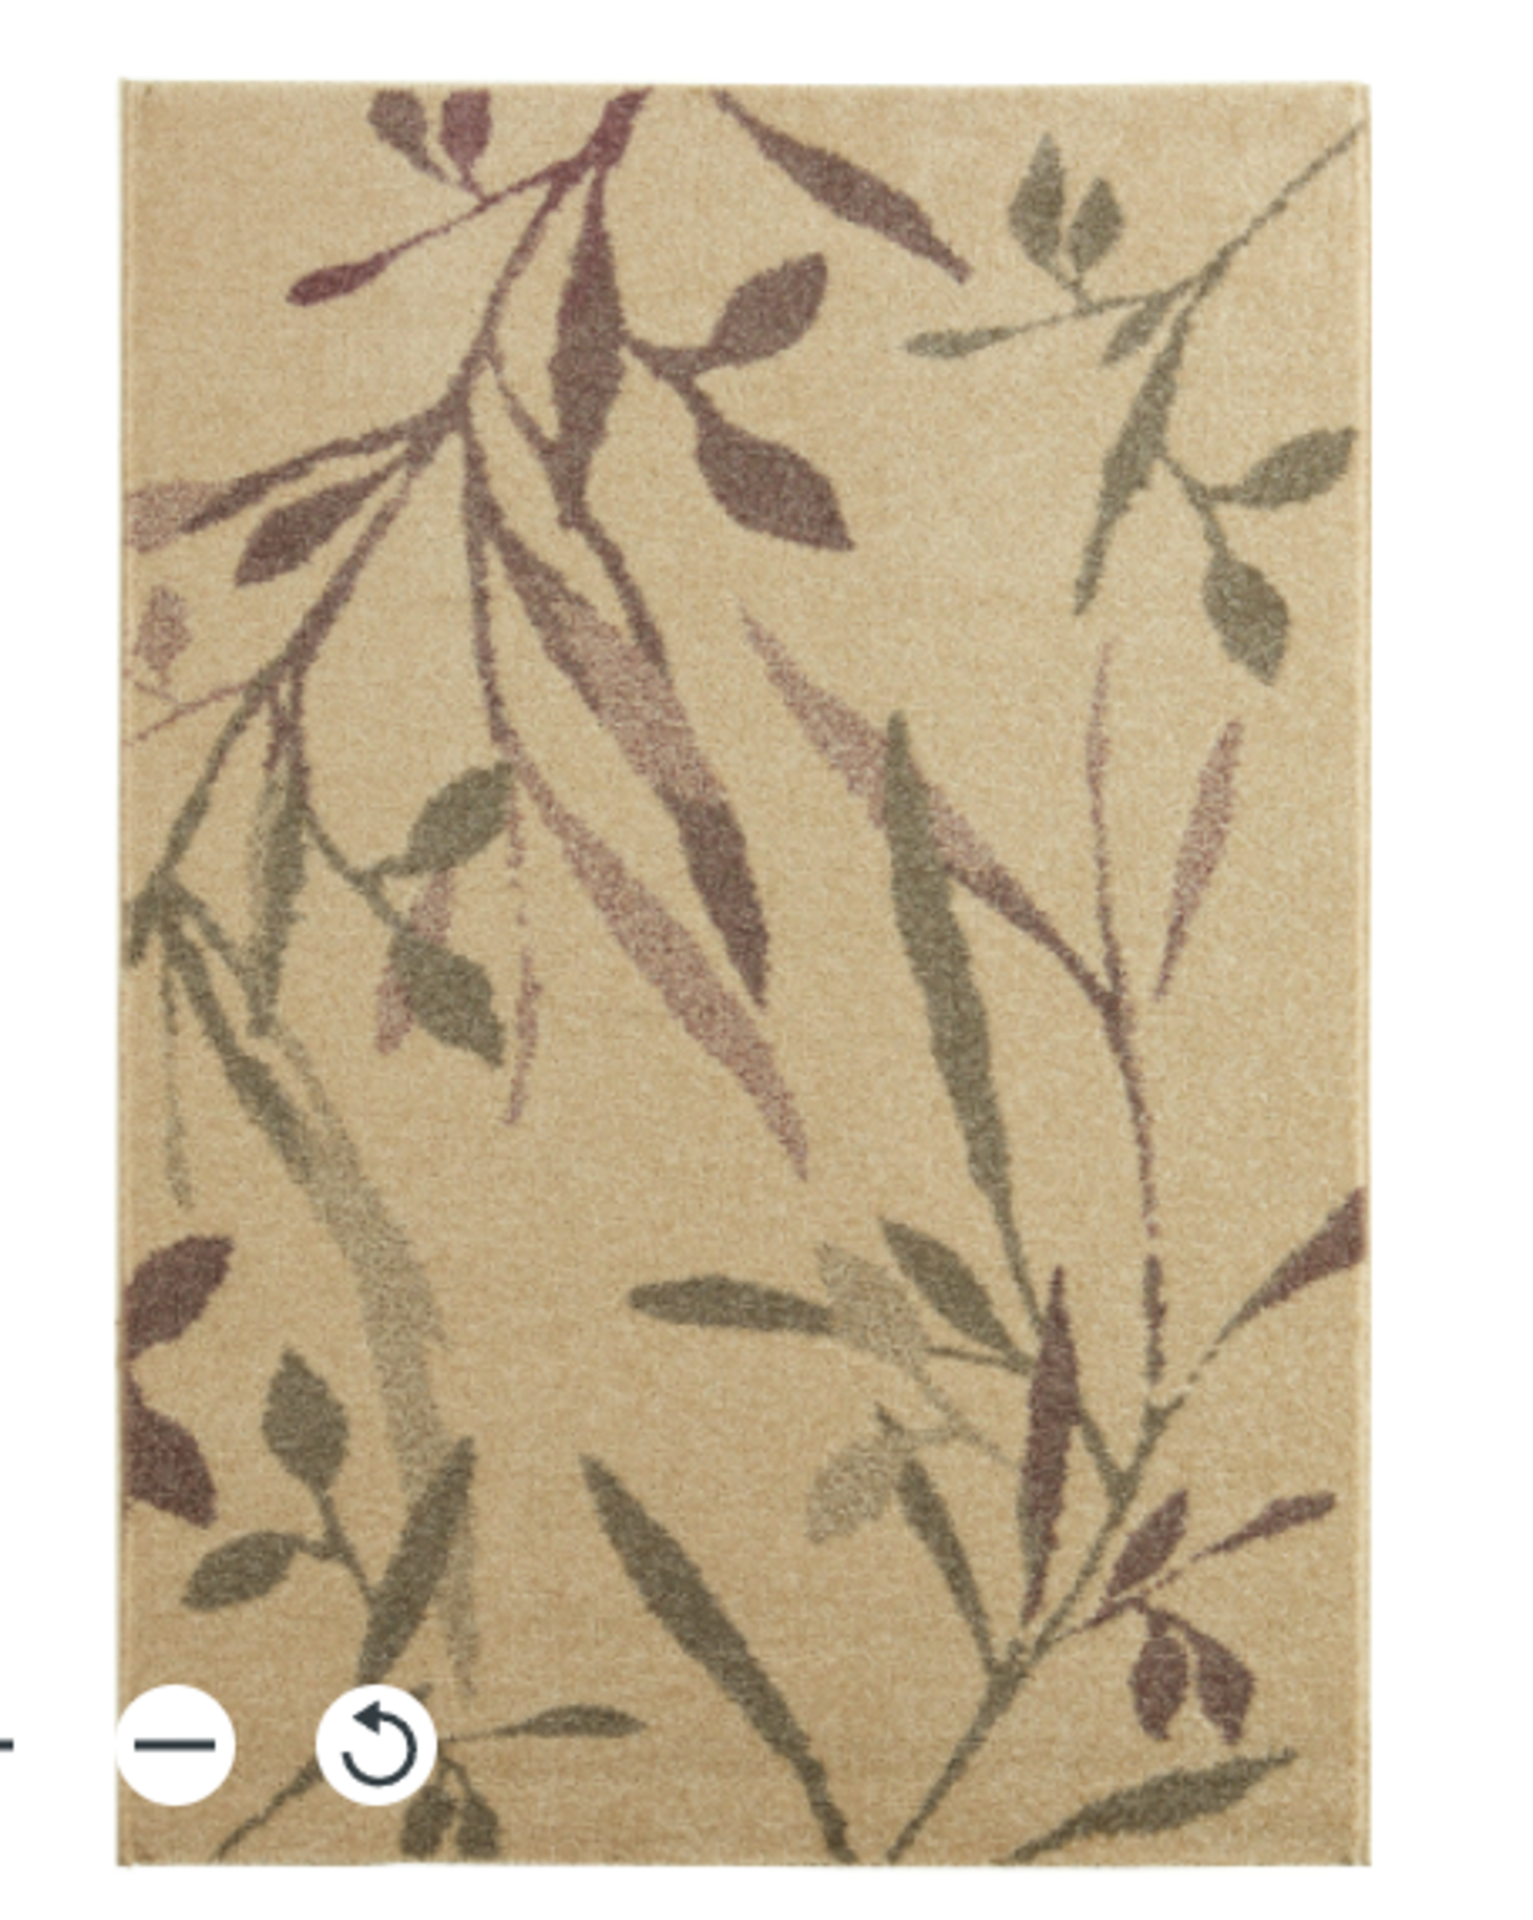 NEW PACKAGED COLOURS ALIYAH TRAILING LEAF RUG BEIGE/PURPLE 160X230CM - T/R - Image 2 of 2